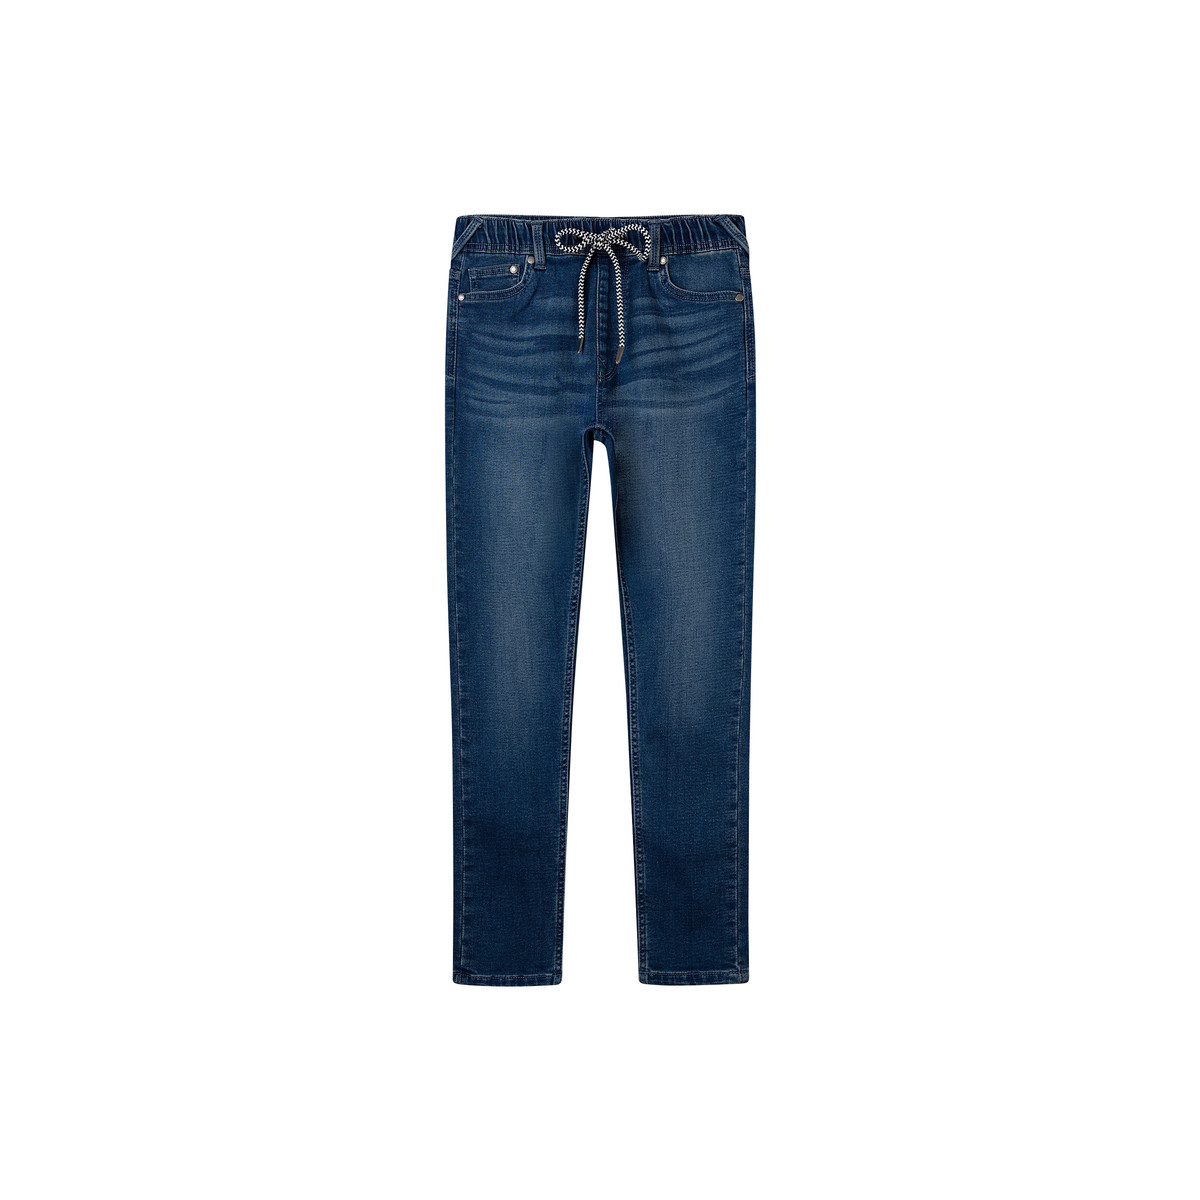 Pepe jeans  Tζιν σε ίσια γραμή Pepe jeans ARCHIE